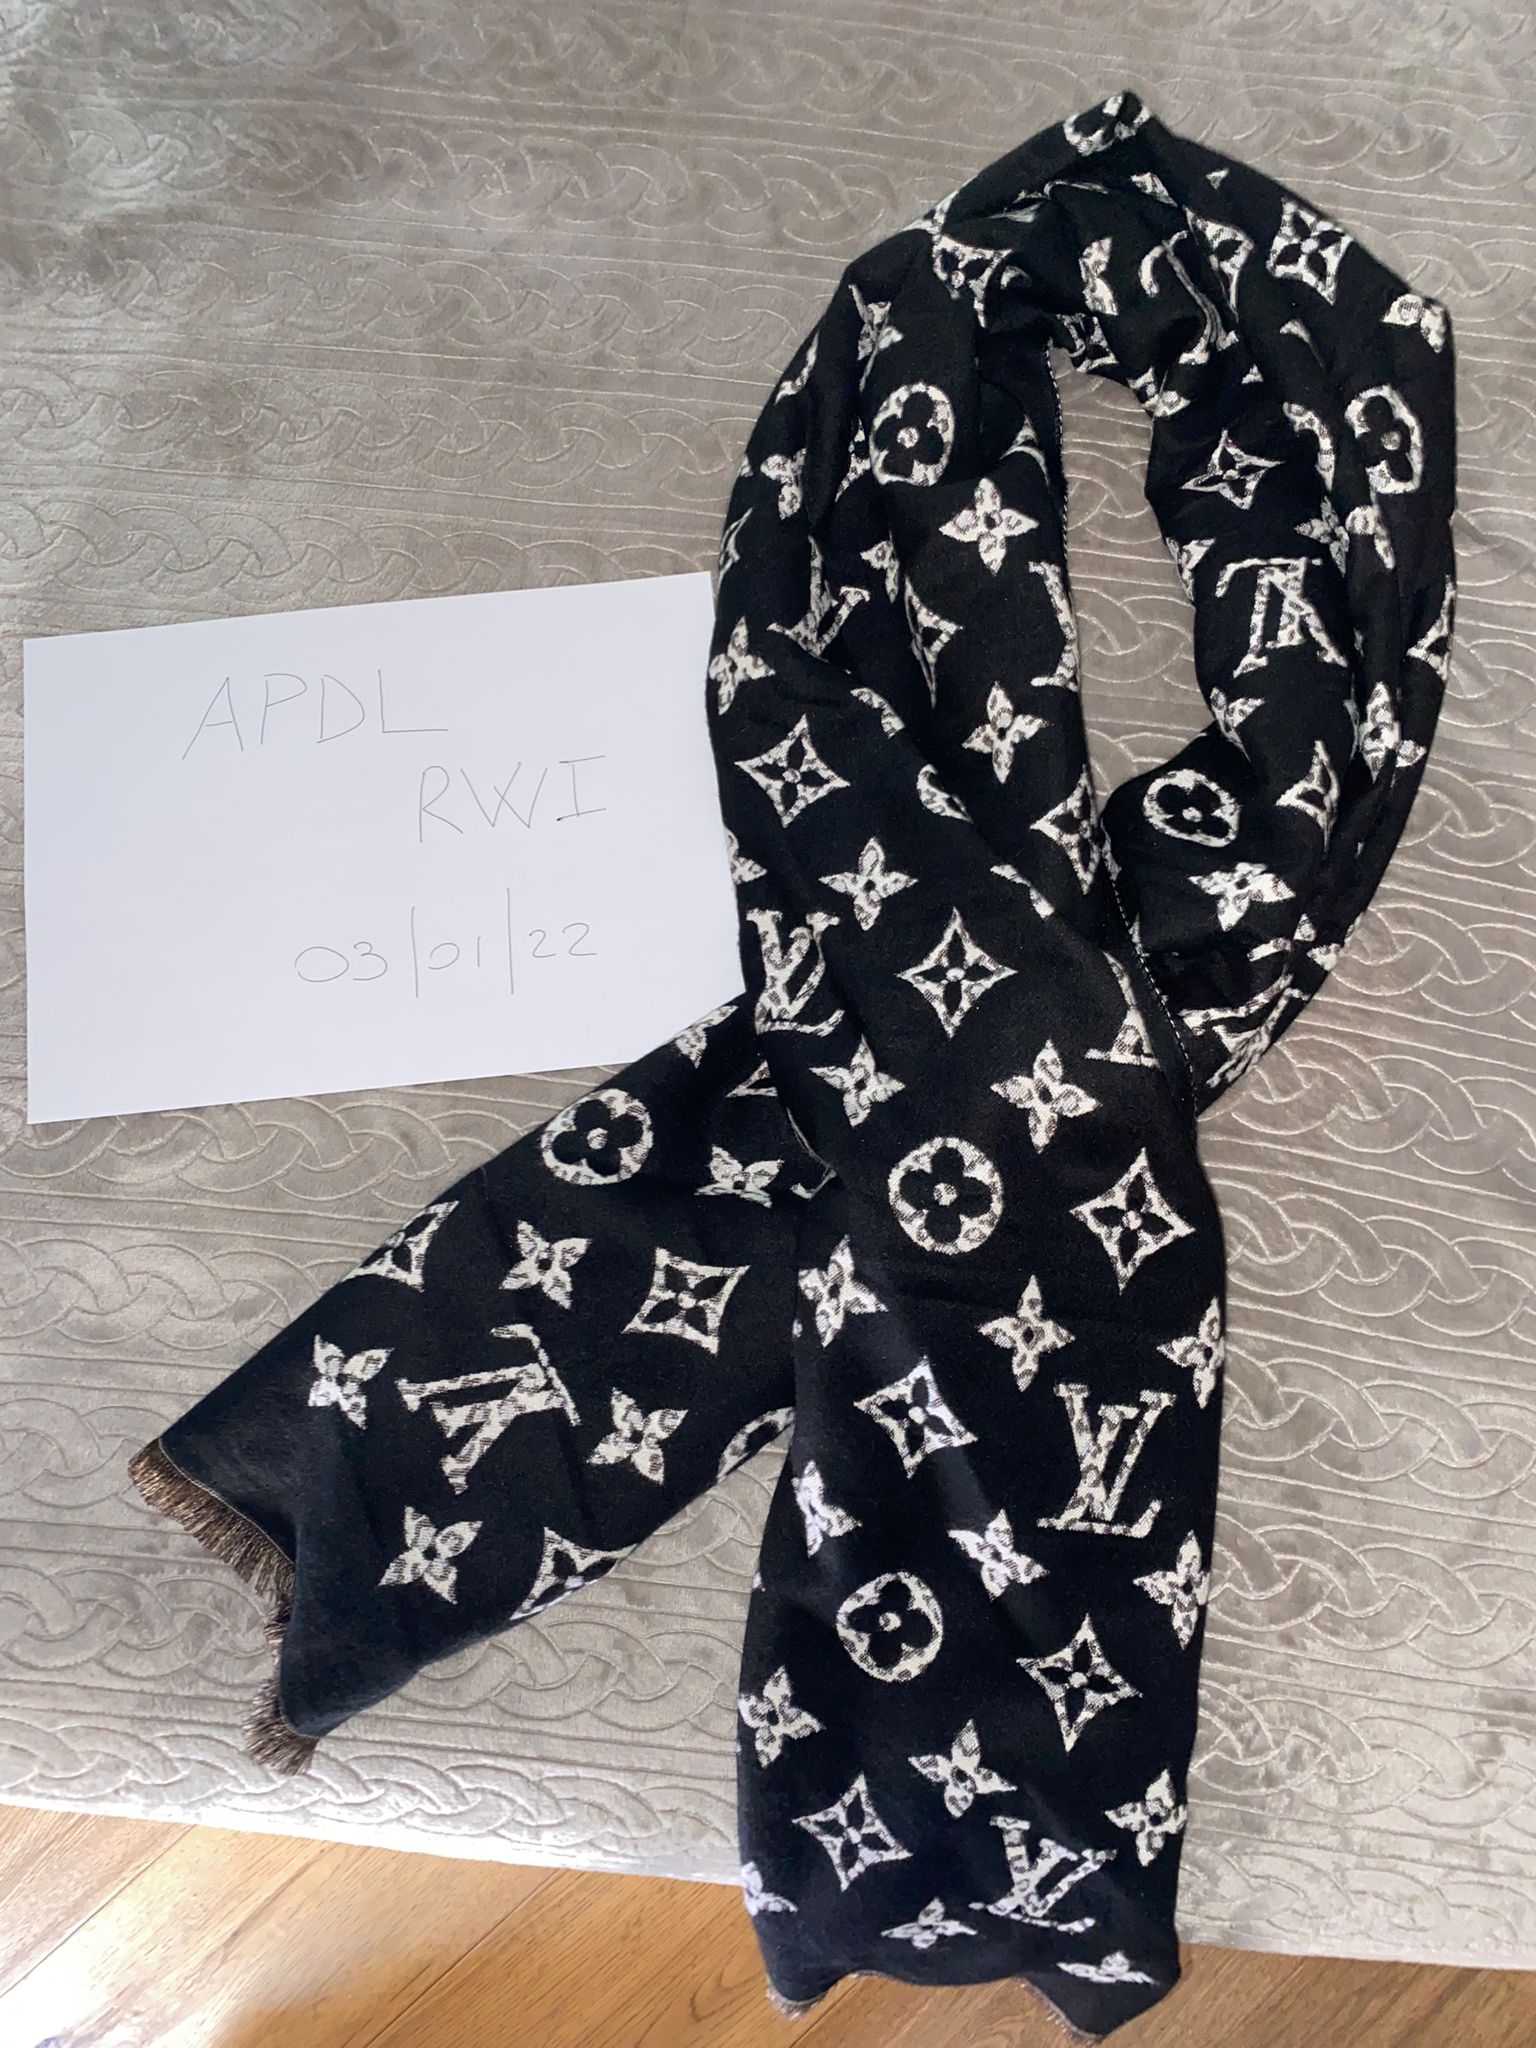 Best Replica Scarves And Shawls  Replica Louis Vuitton Scarfs For Sale